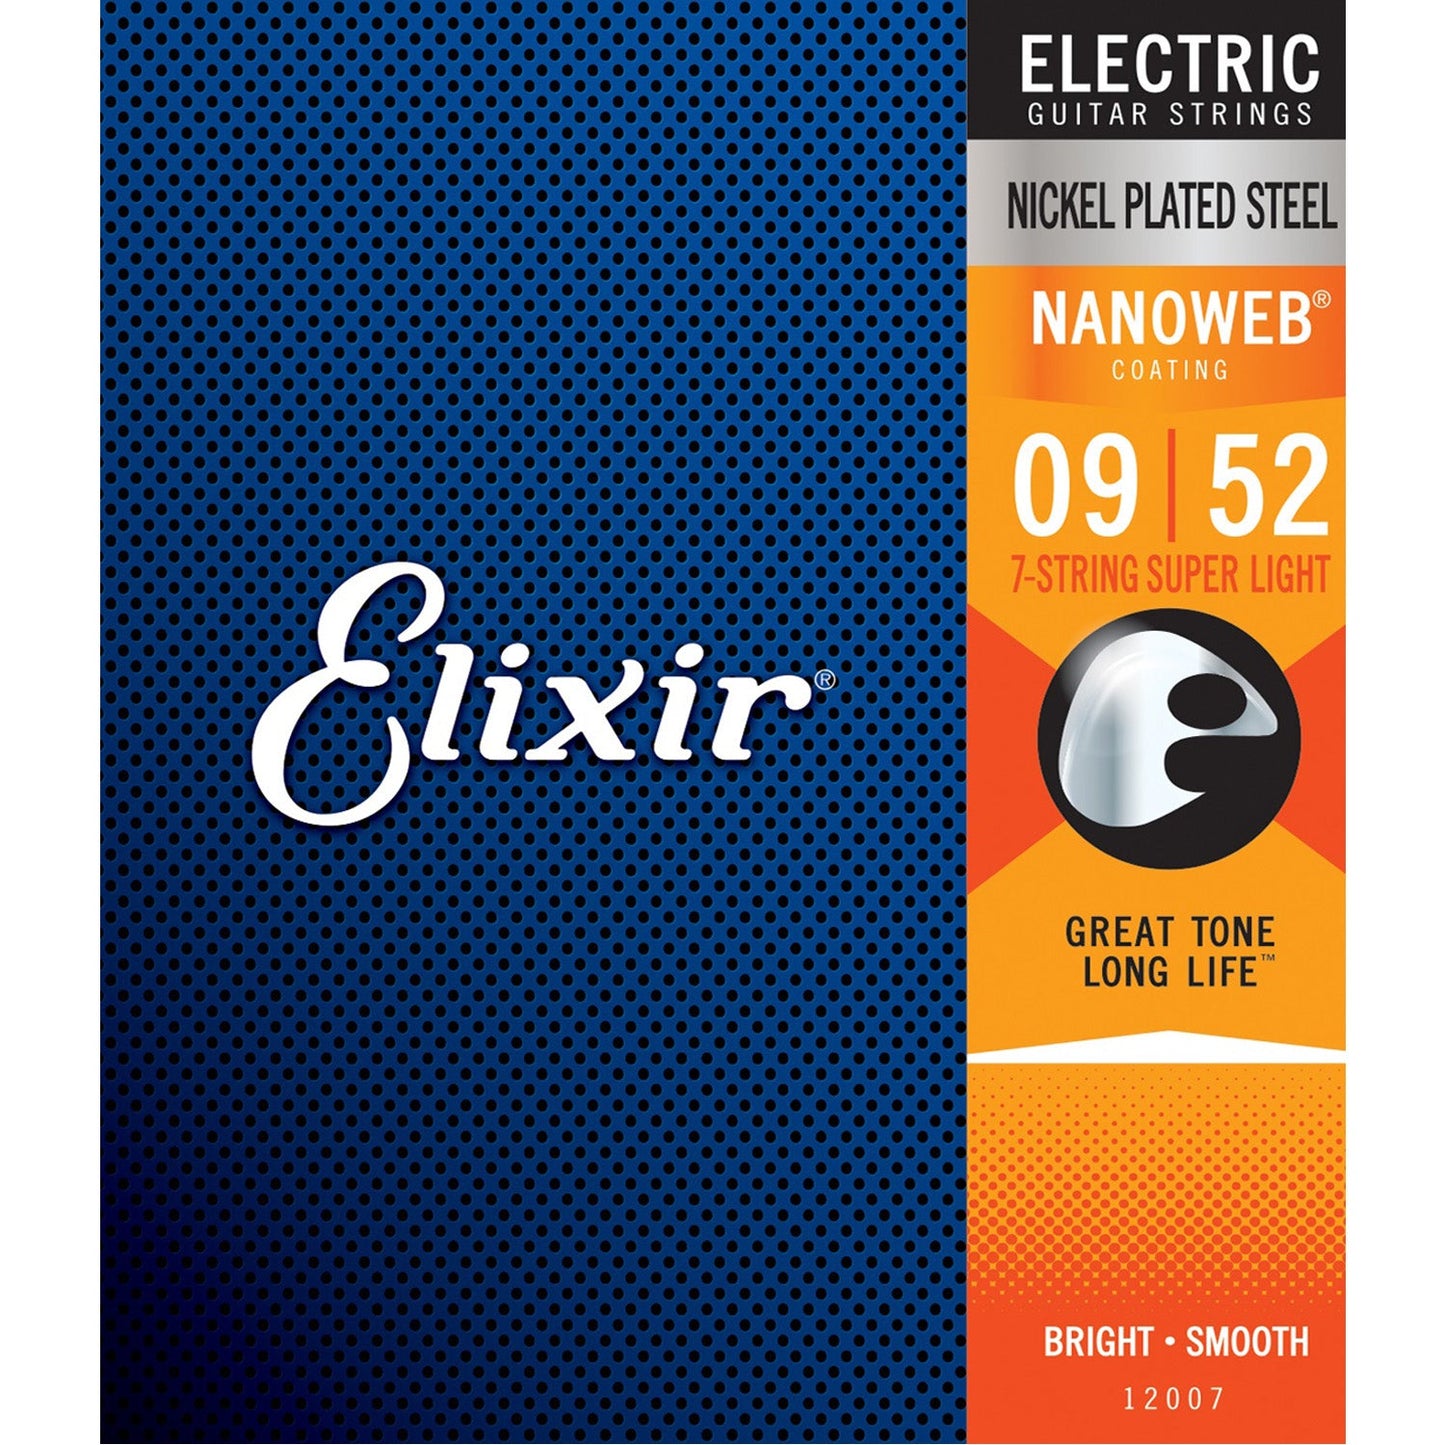 Elixir Electric Nickel Plated Steel Electric Guitar Strings with NANOWEB Coating - 7-String Super Light (9 11 16 24 32 42 52)